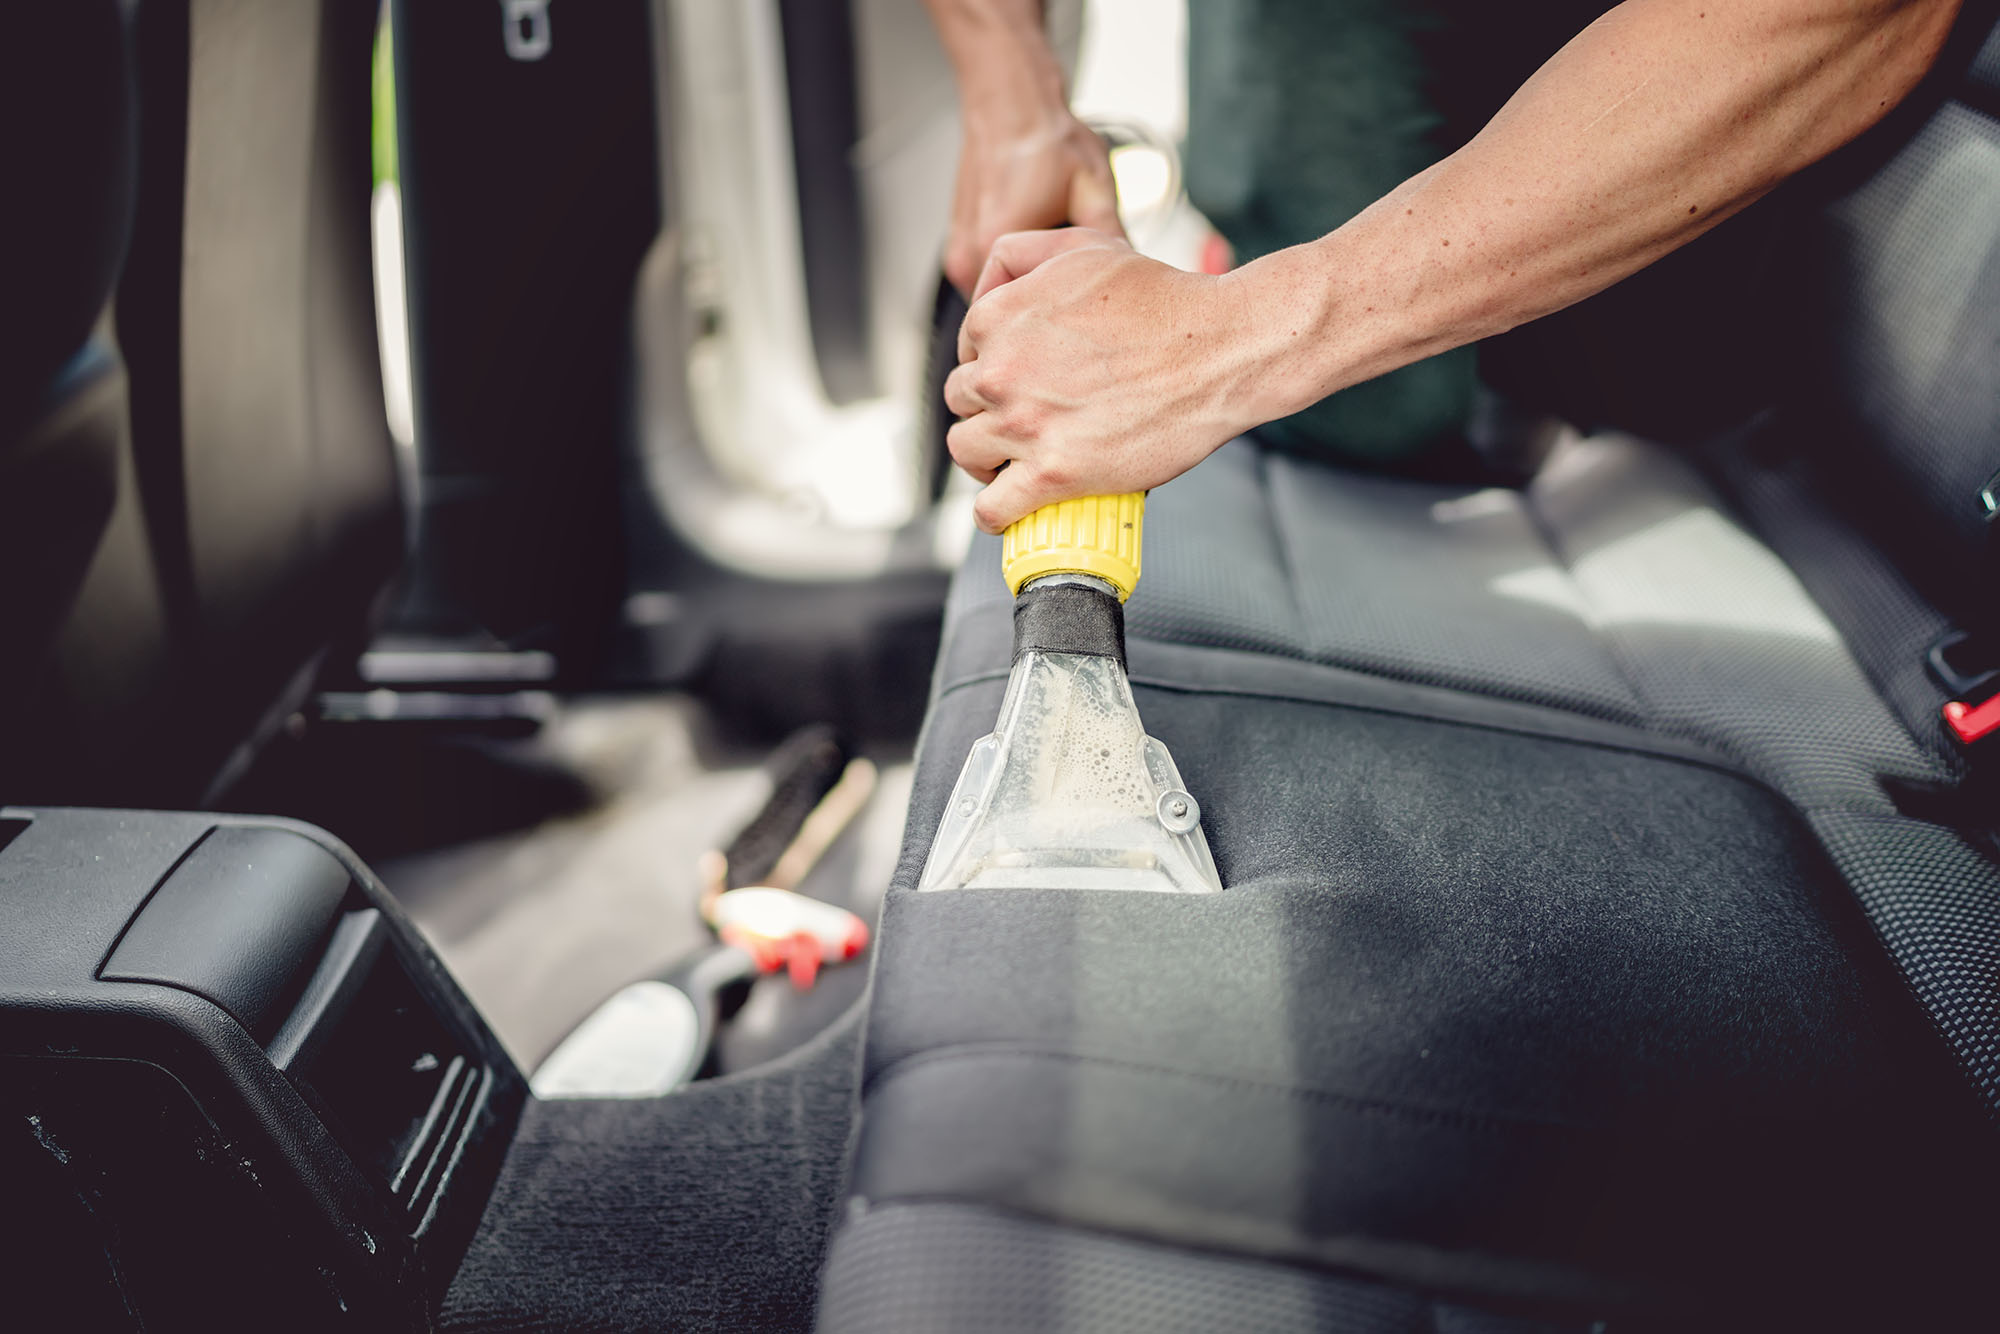 A person uses an upholstery cleaning machine to clean the back seat of a car.